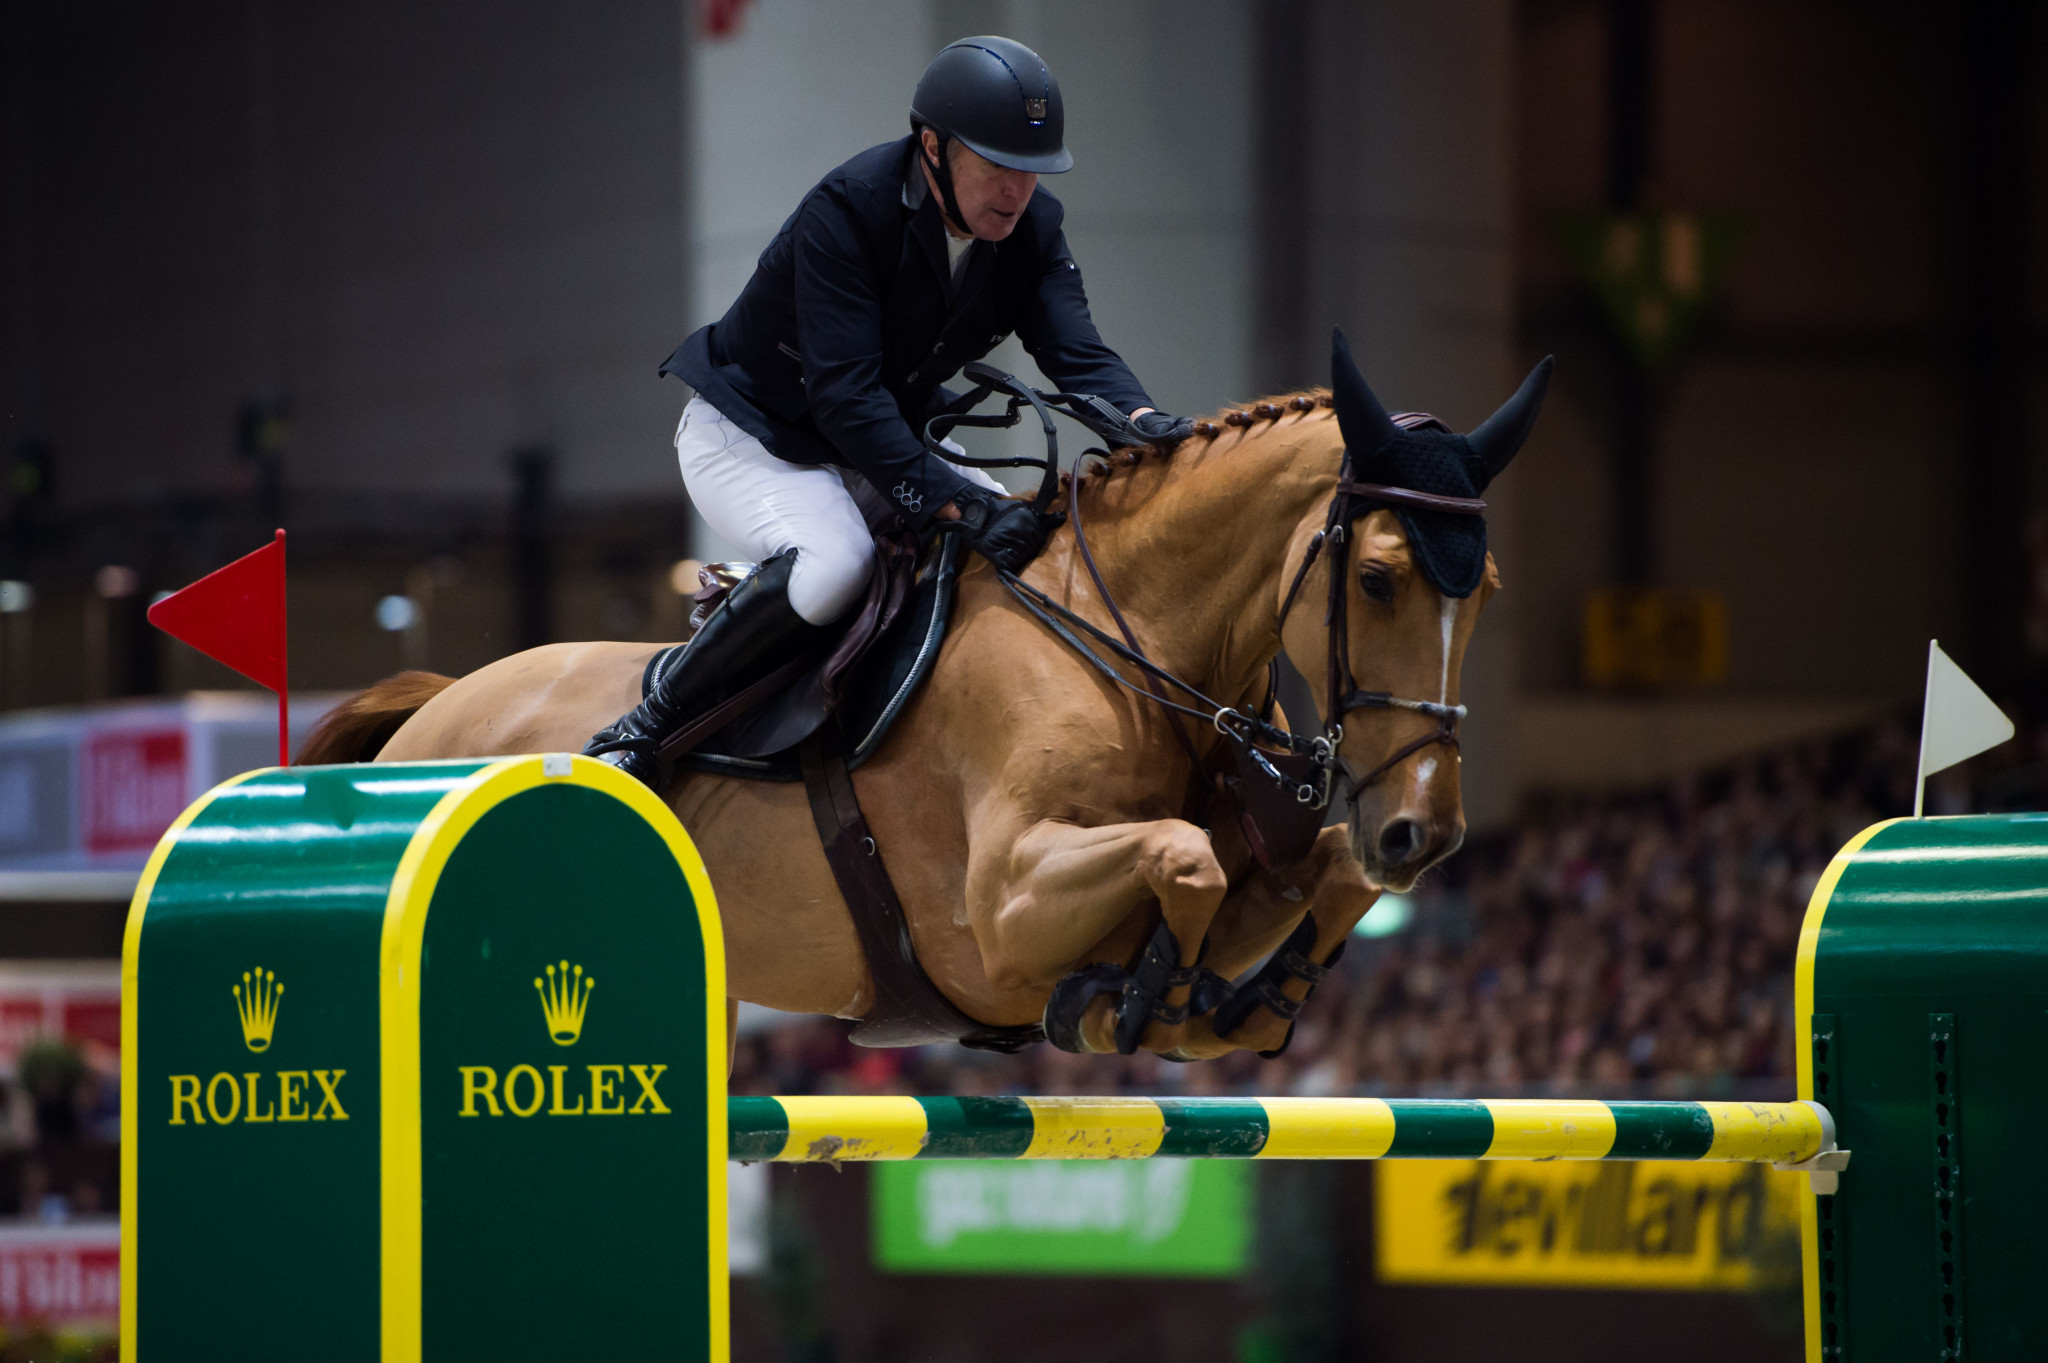 Bost triumphs in high quality FEI World Cup Western League Jumping event in Madrid